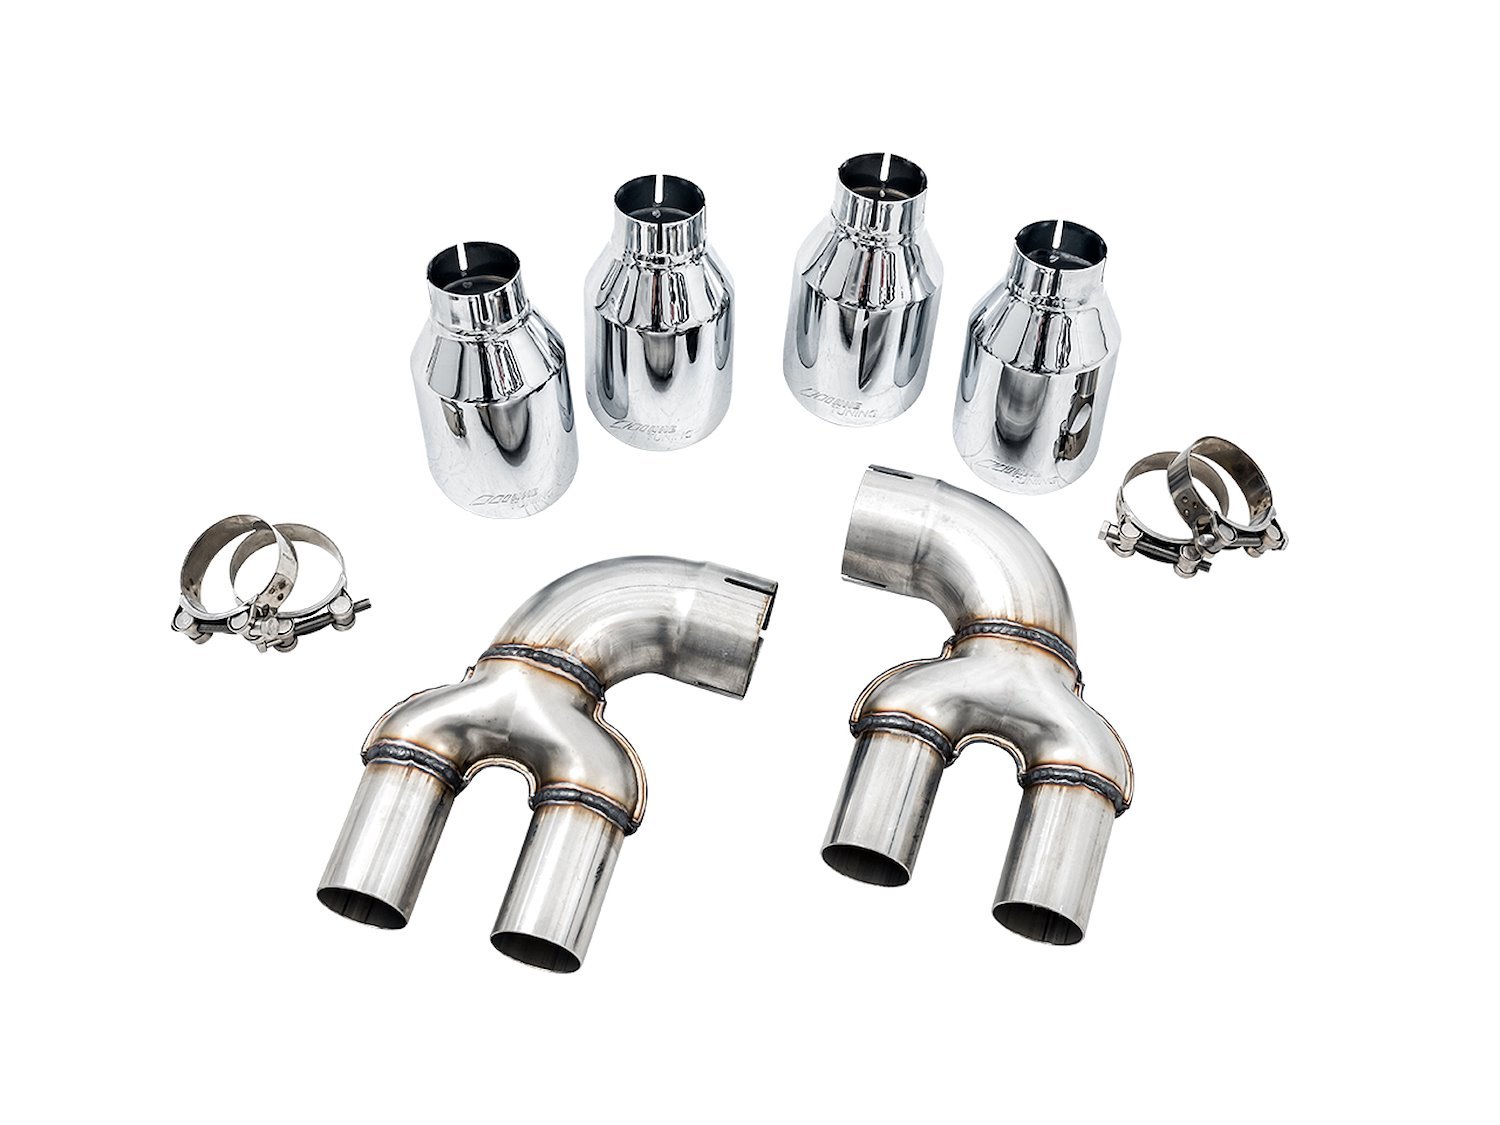 AWE OE-to-Quad Tip Conversion Kit for G2X M340i / M440i - Chrome Silver Tips